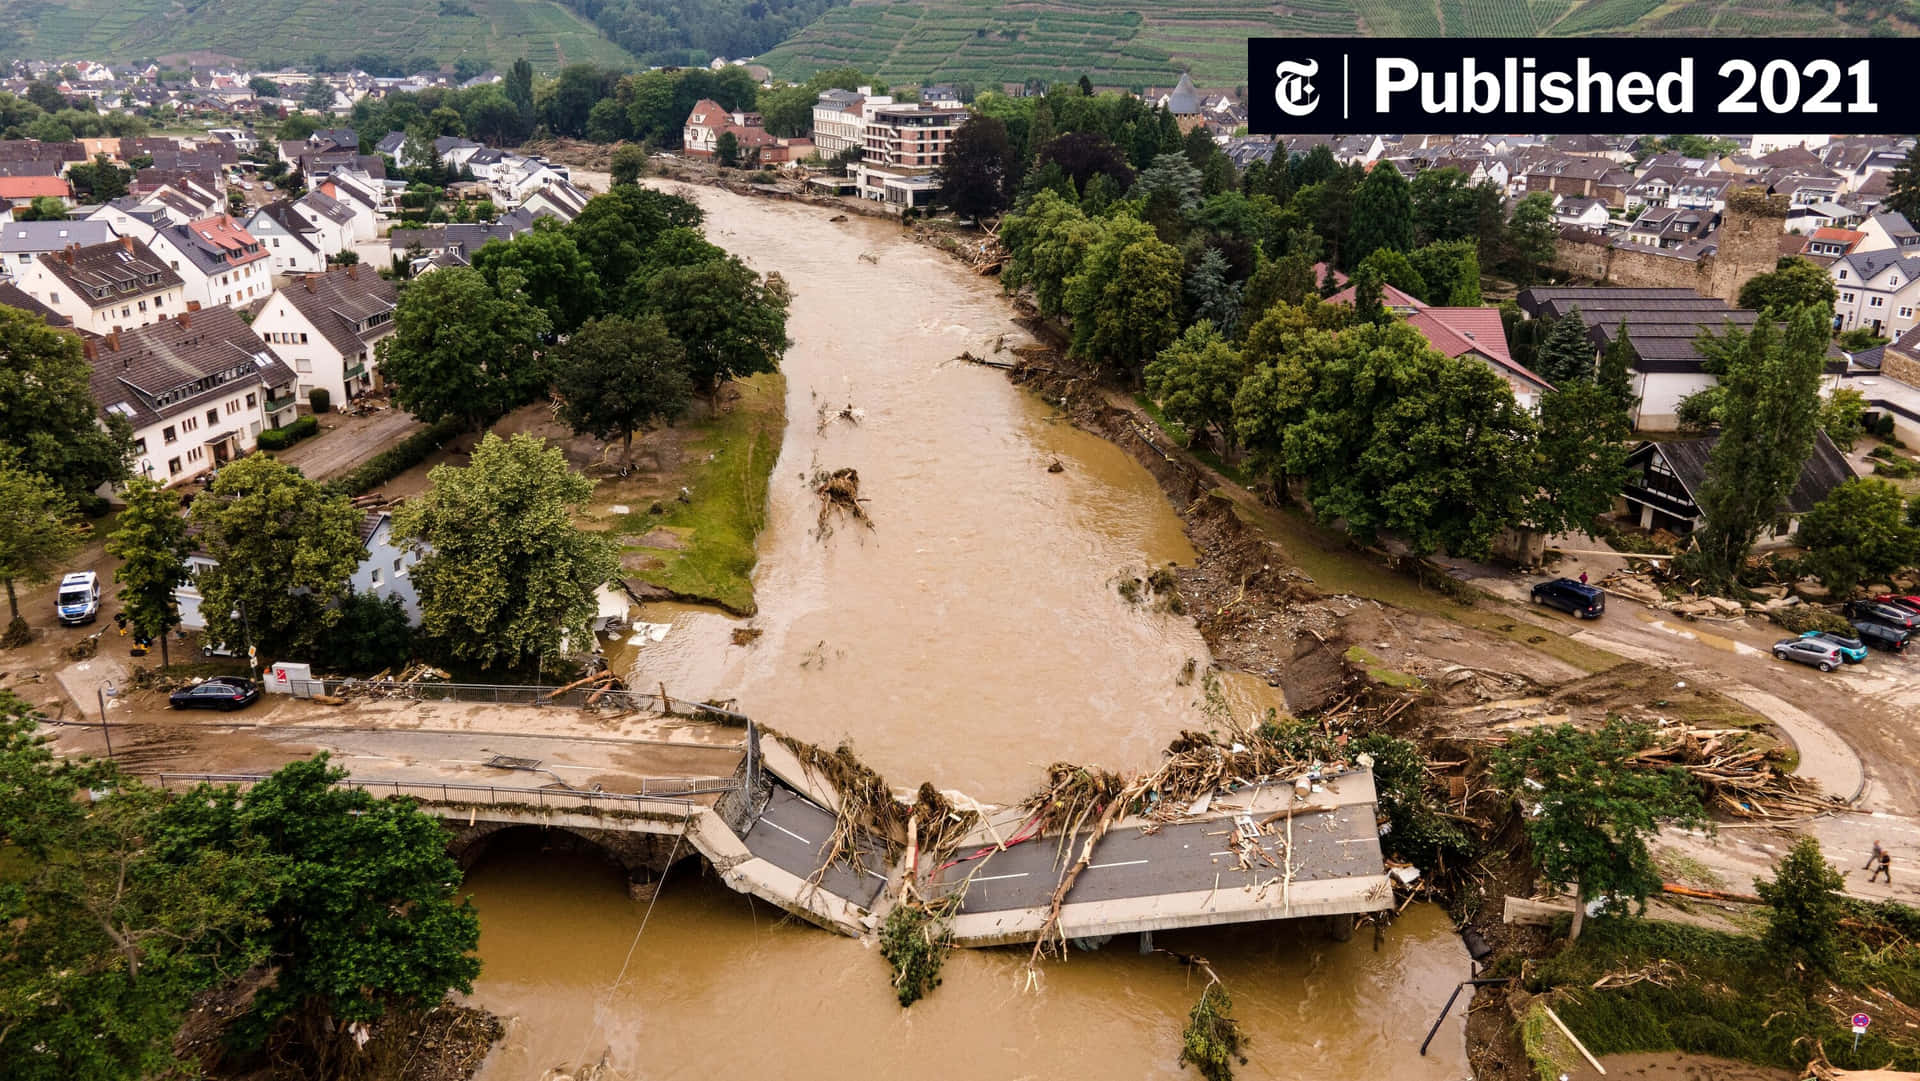 "A powerful natural disaster can have a devastating effect. A flood wreaks havoc in a rural area."